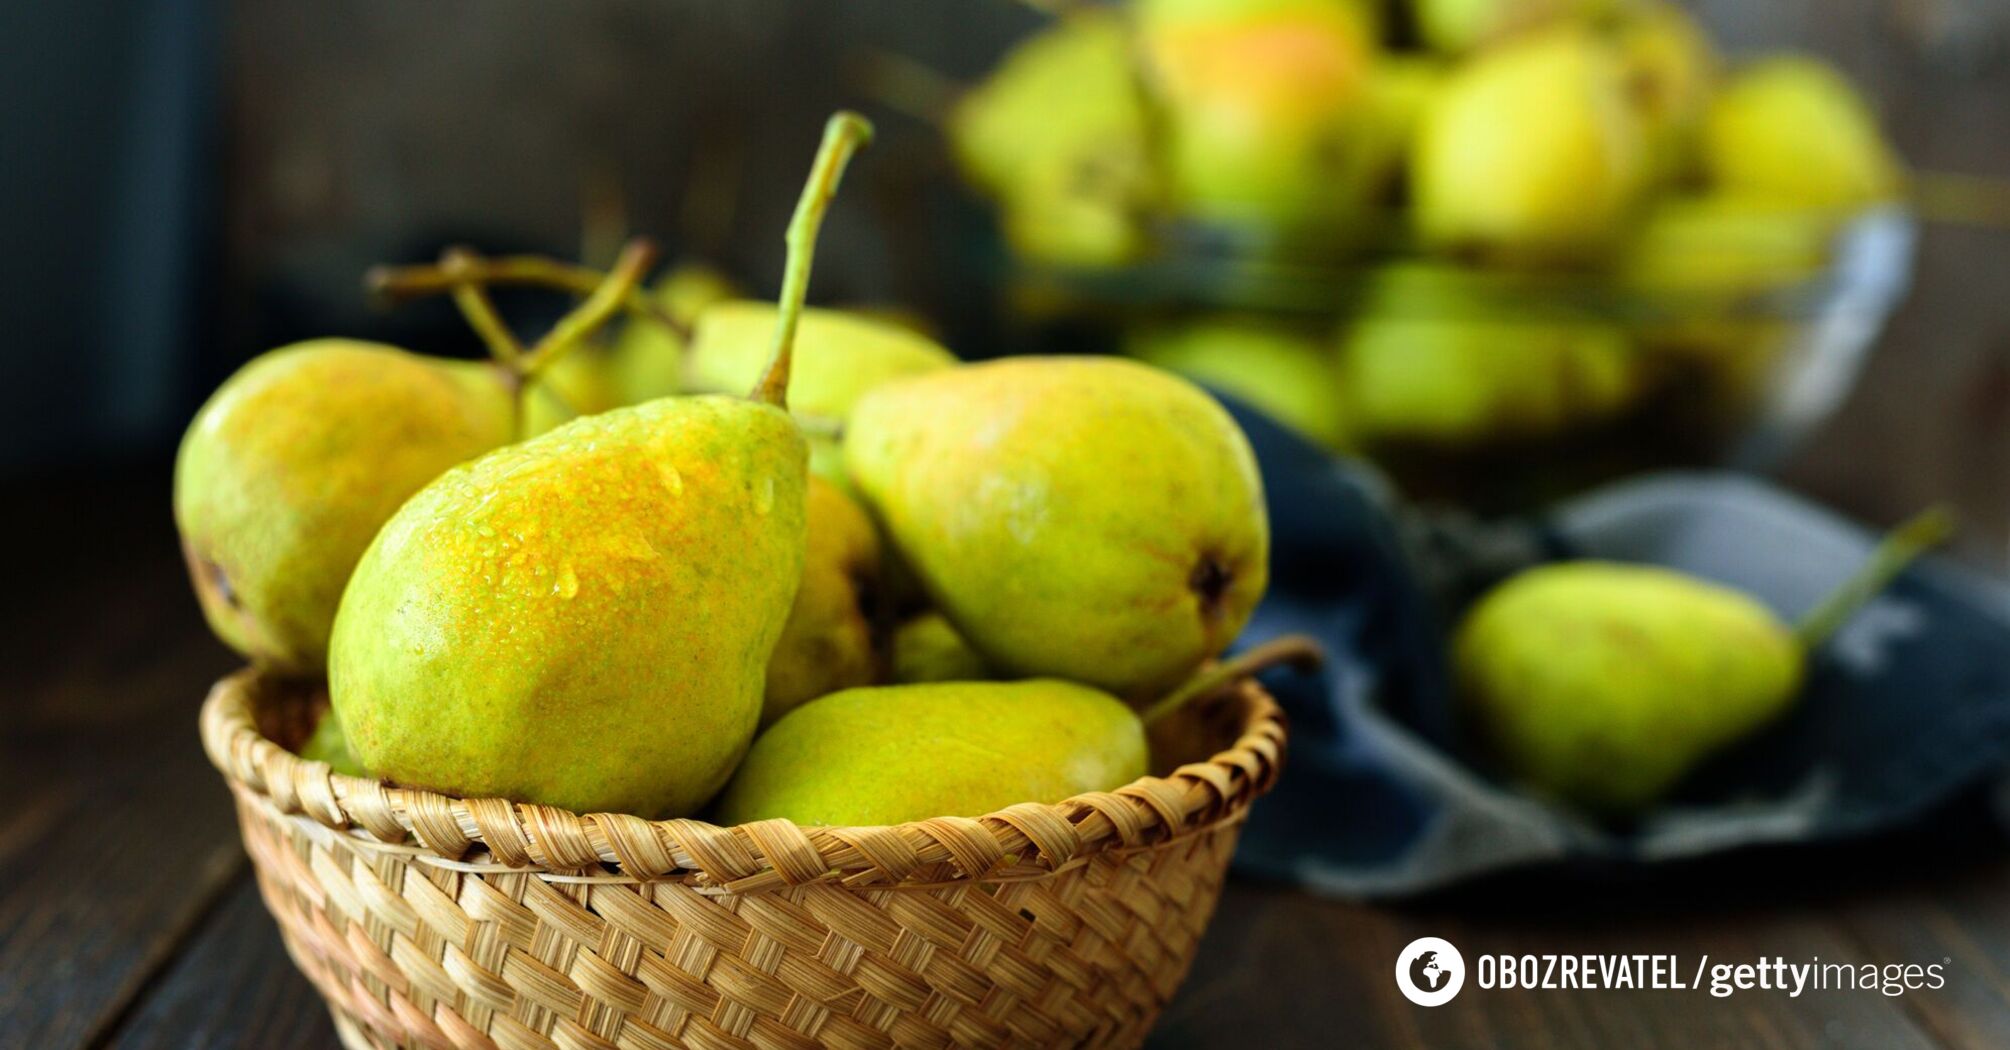 Pear counteracts skin aging